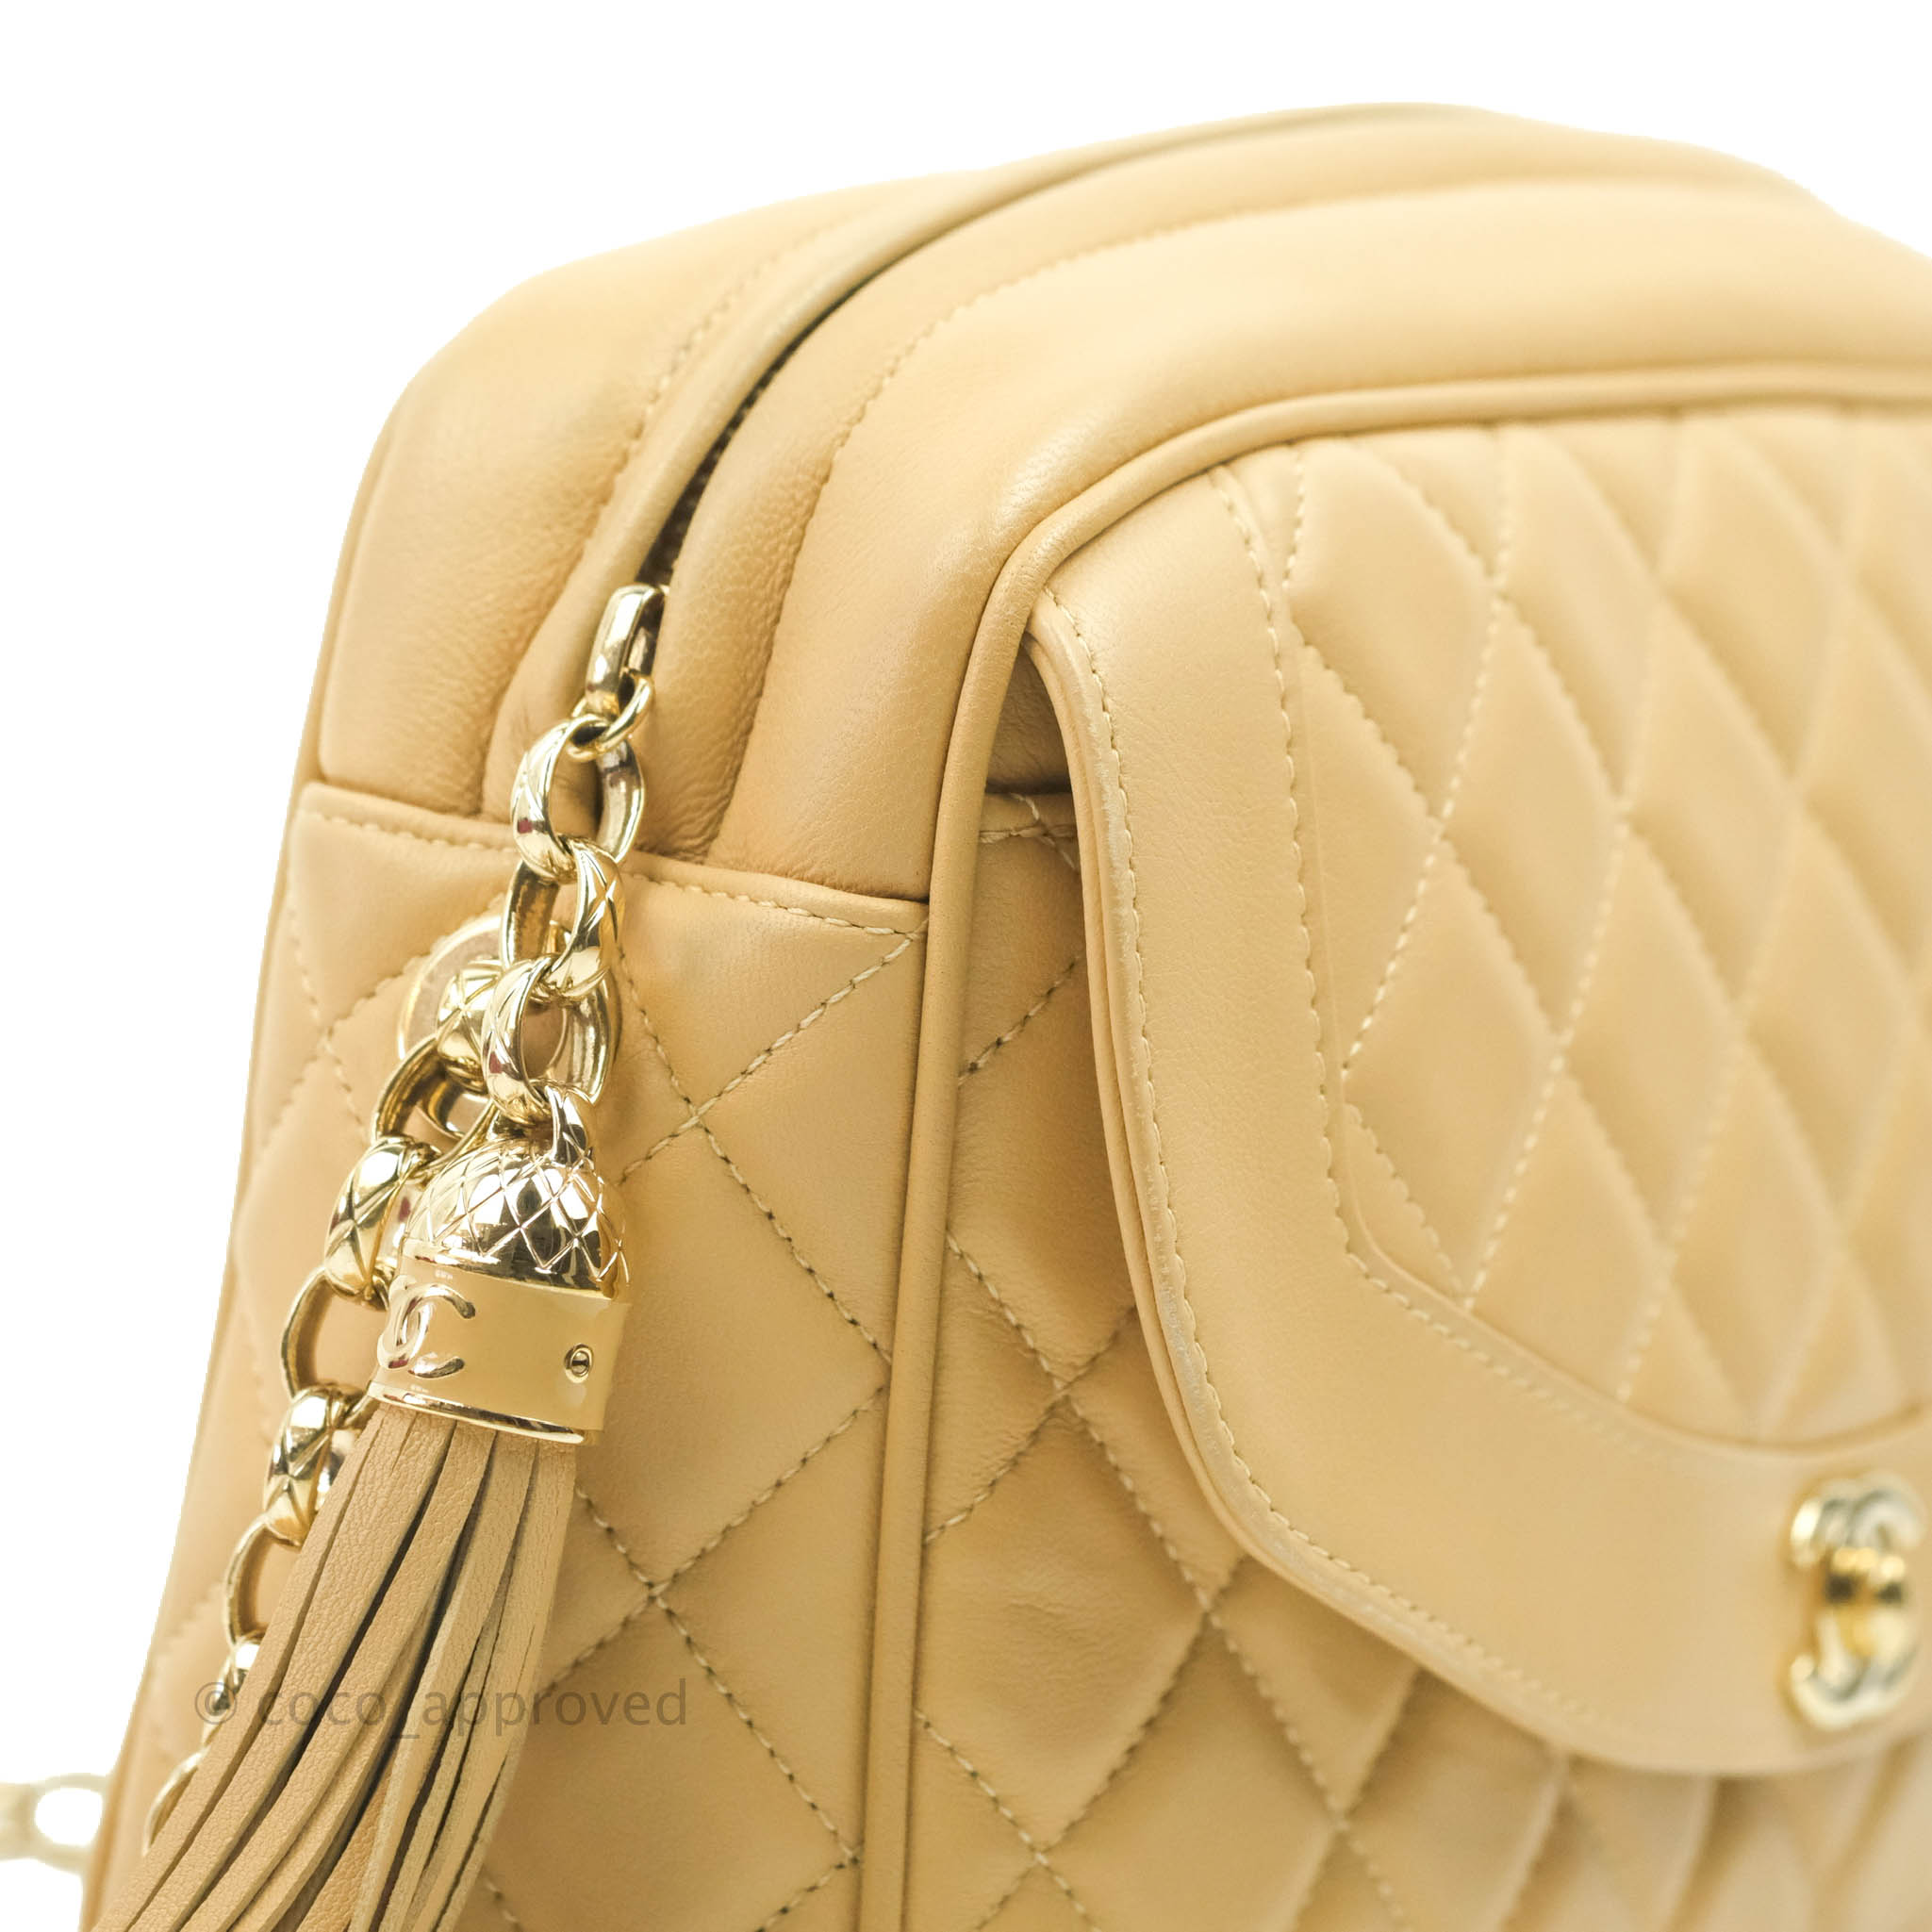 Chanel Mini Pearl Crush Quilted Camera Case Beige Pink Lambskin Aged G – Coco  Approved Studio